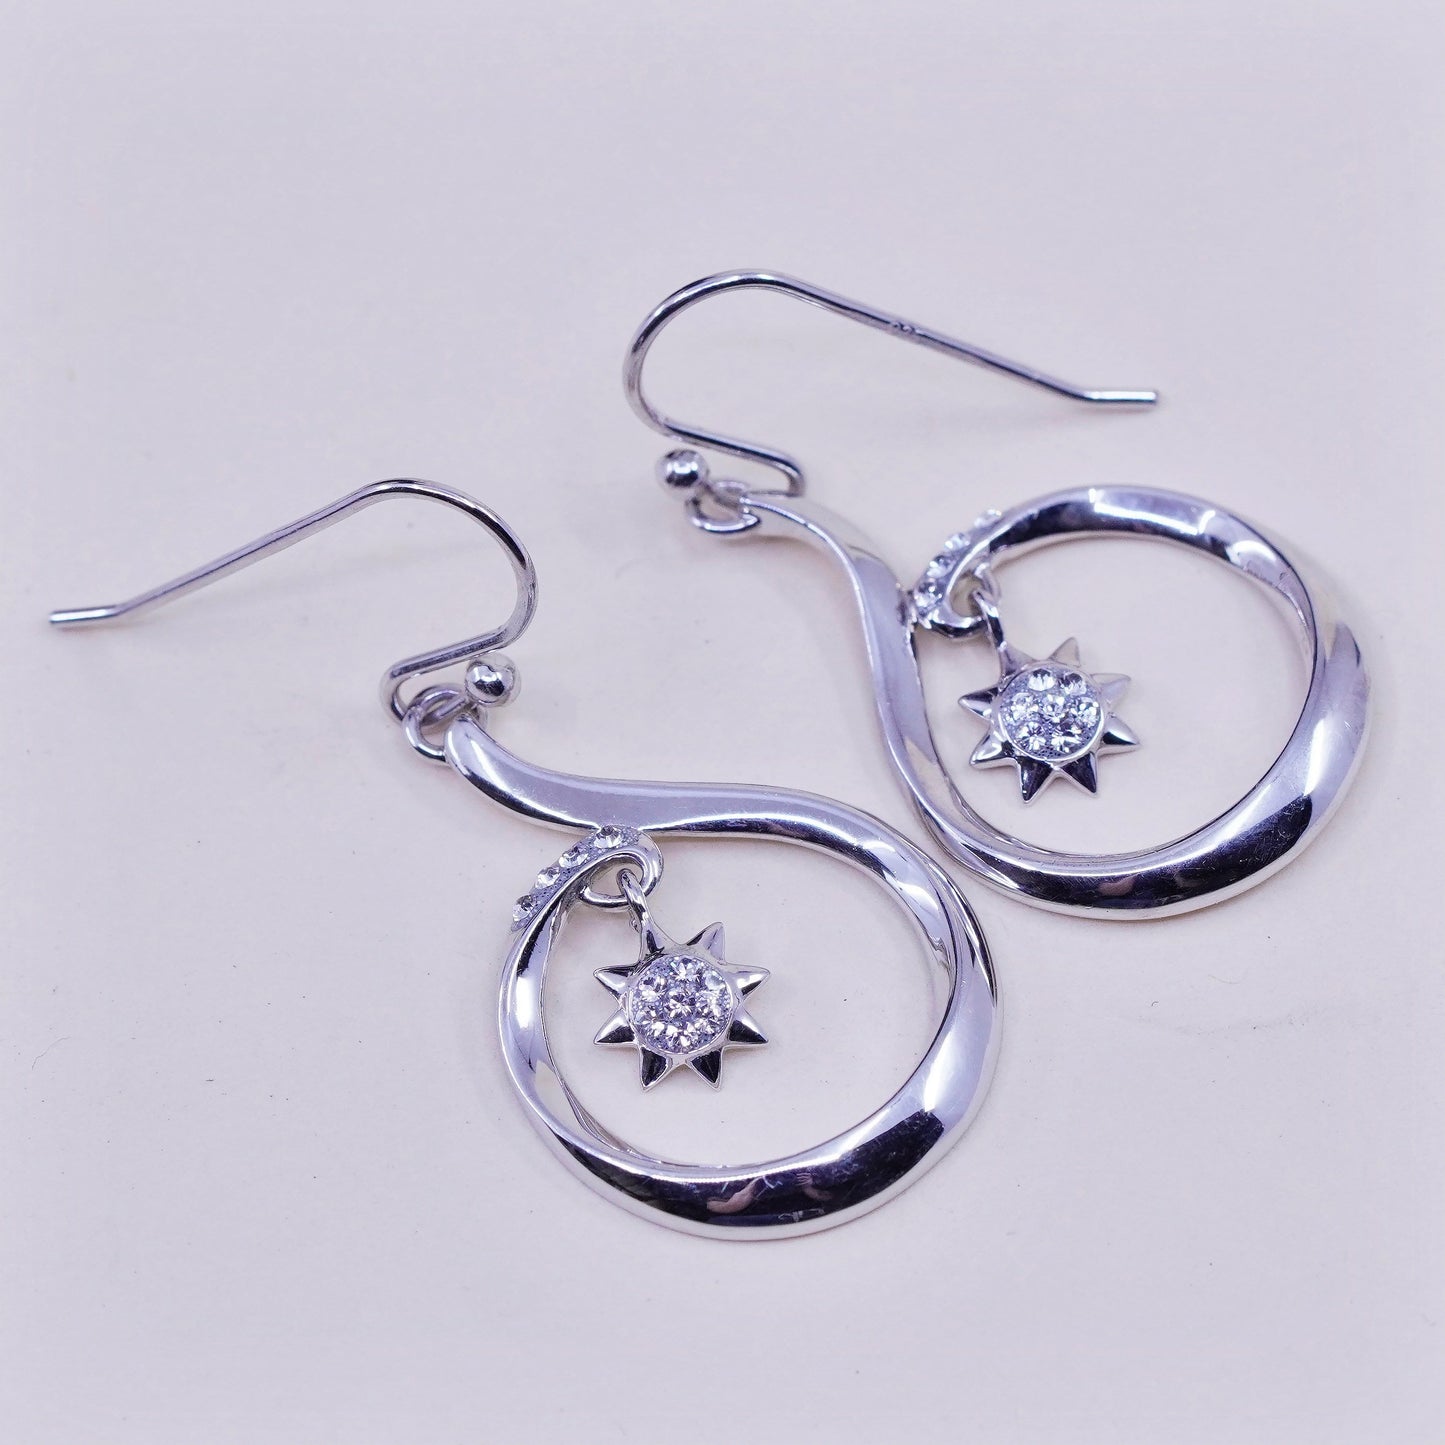 Vintage sterling silver handmade earrings, 925 snowflake drops with cz inlay